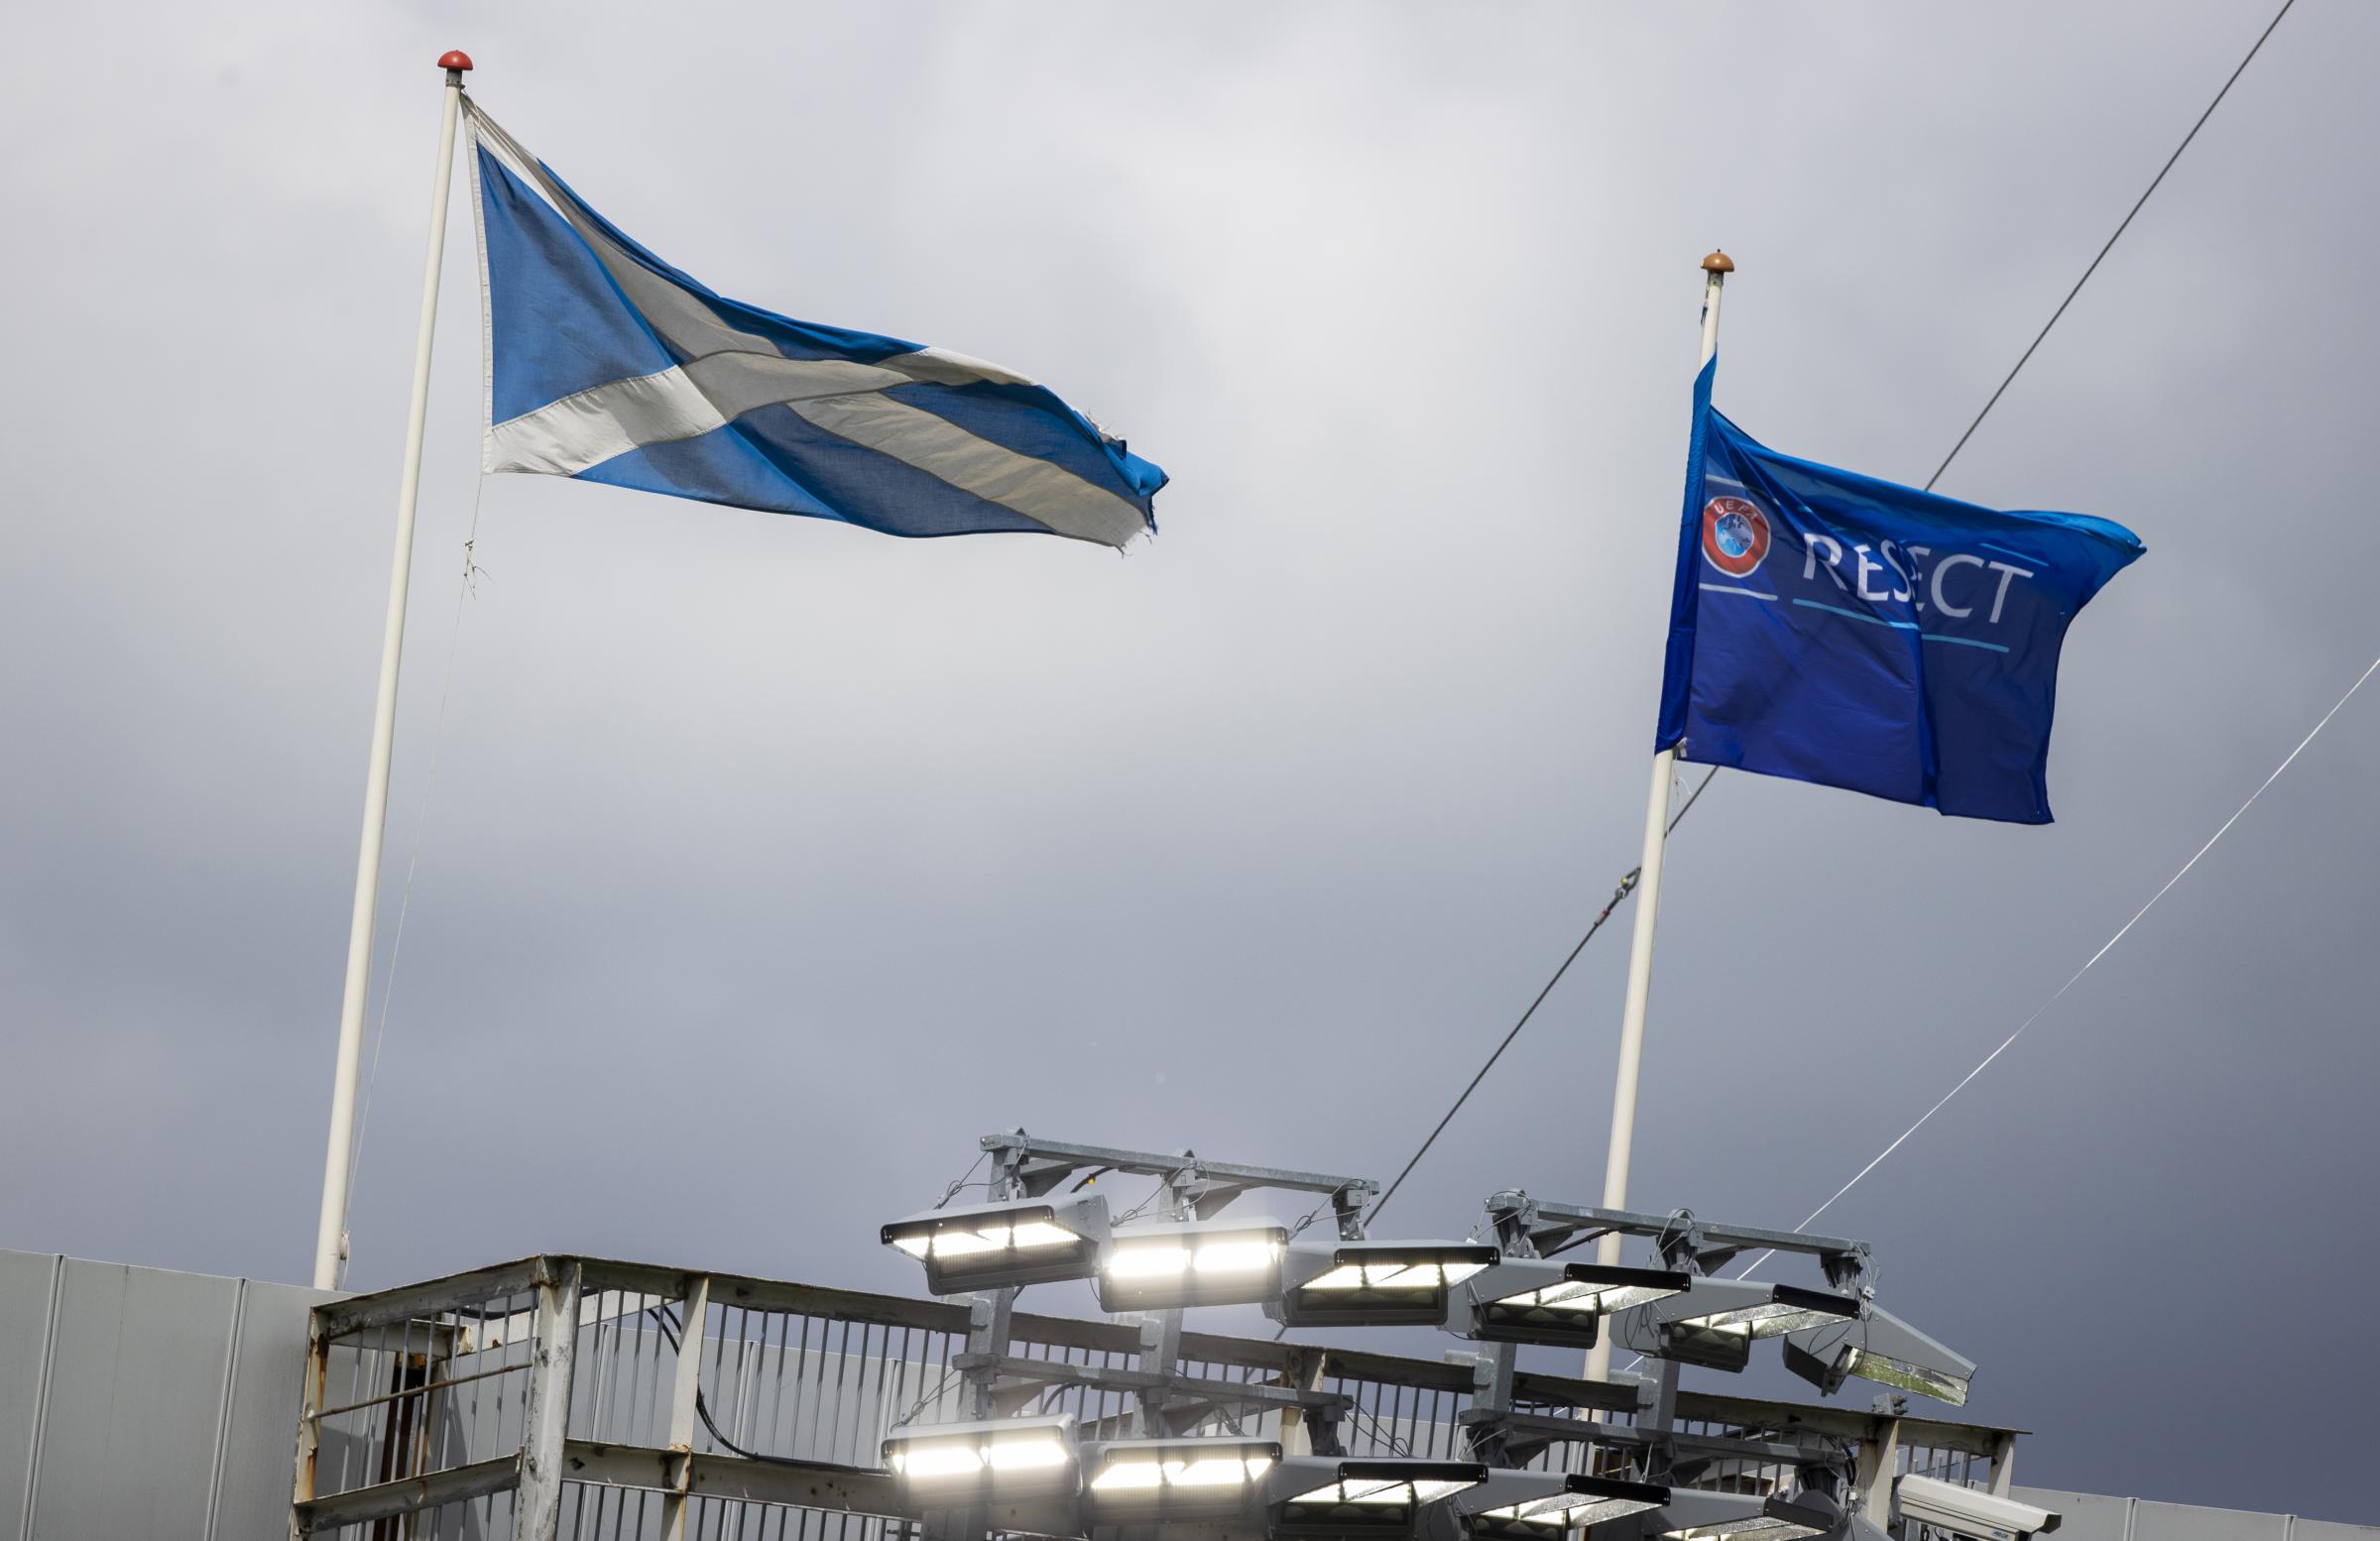 Scotland players to take stand against racism before Euro 2020 clashes